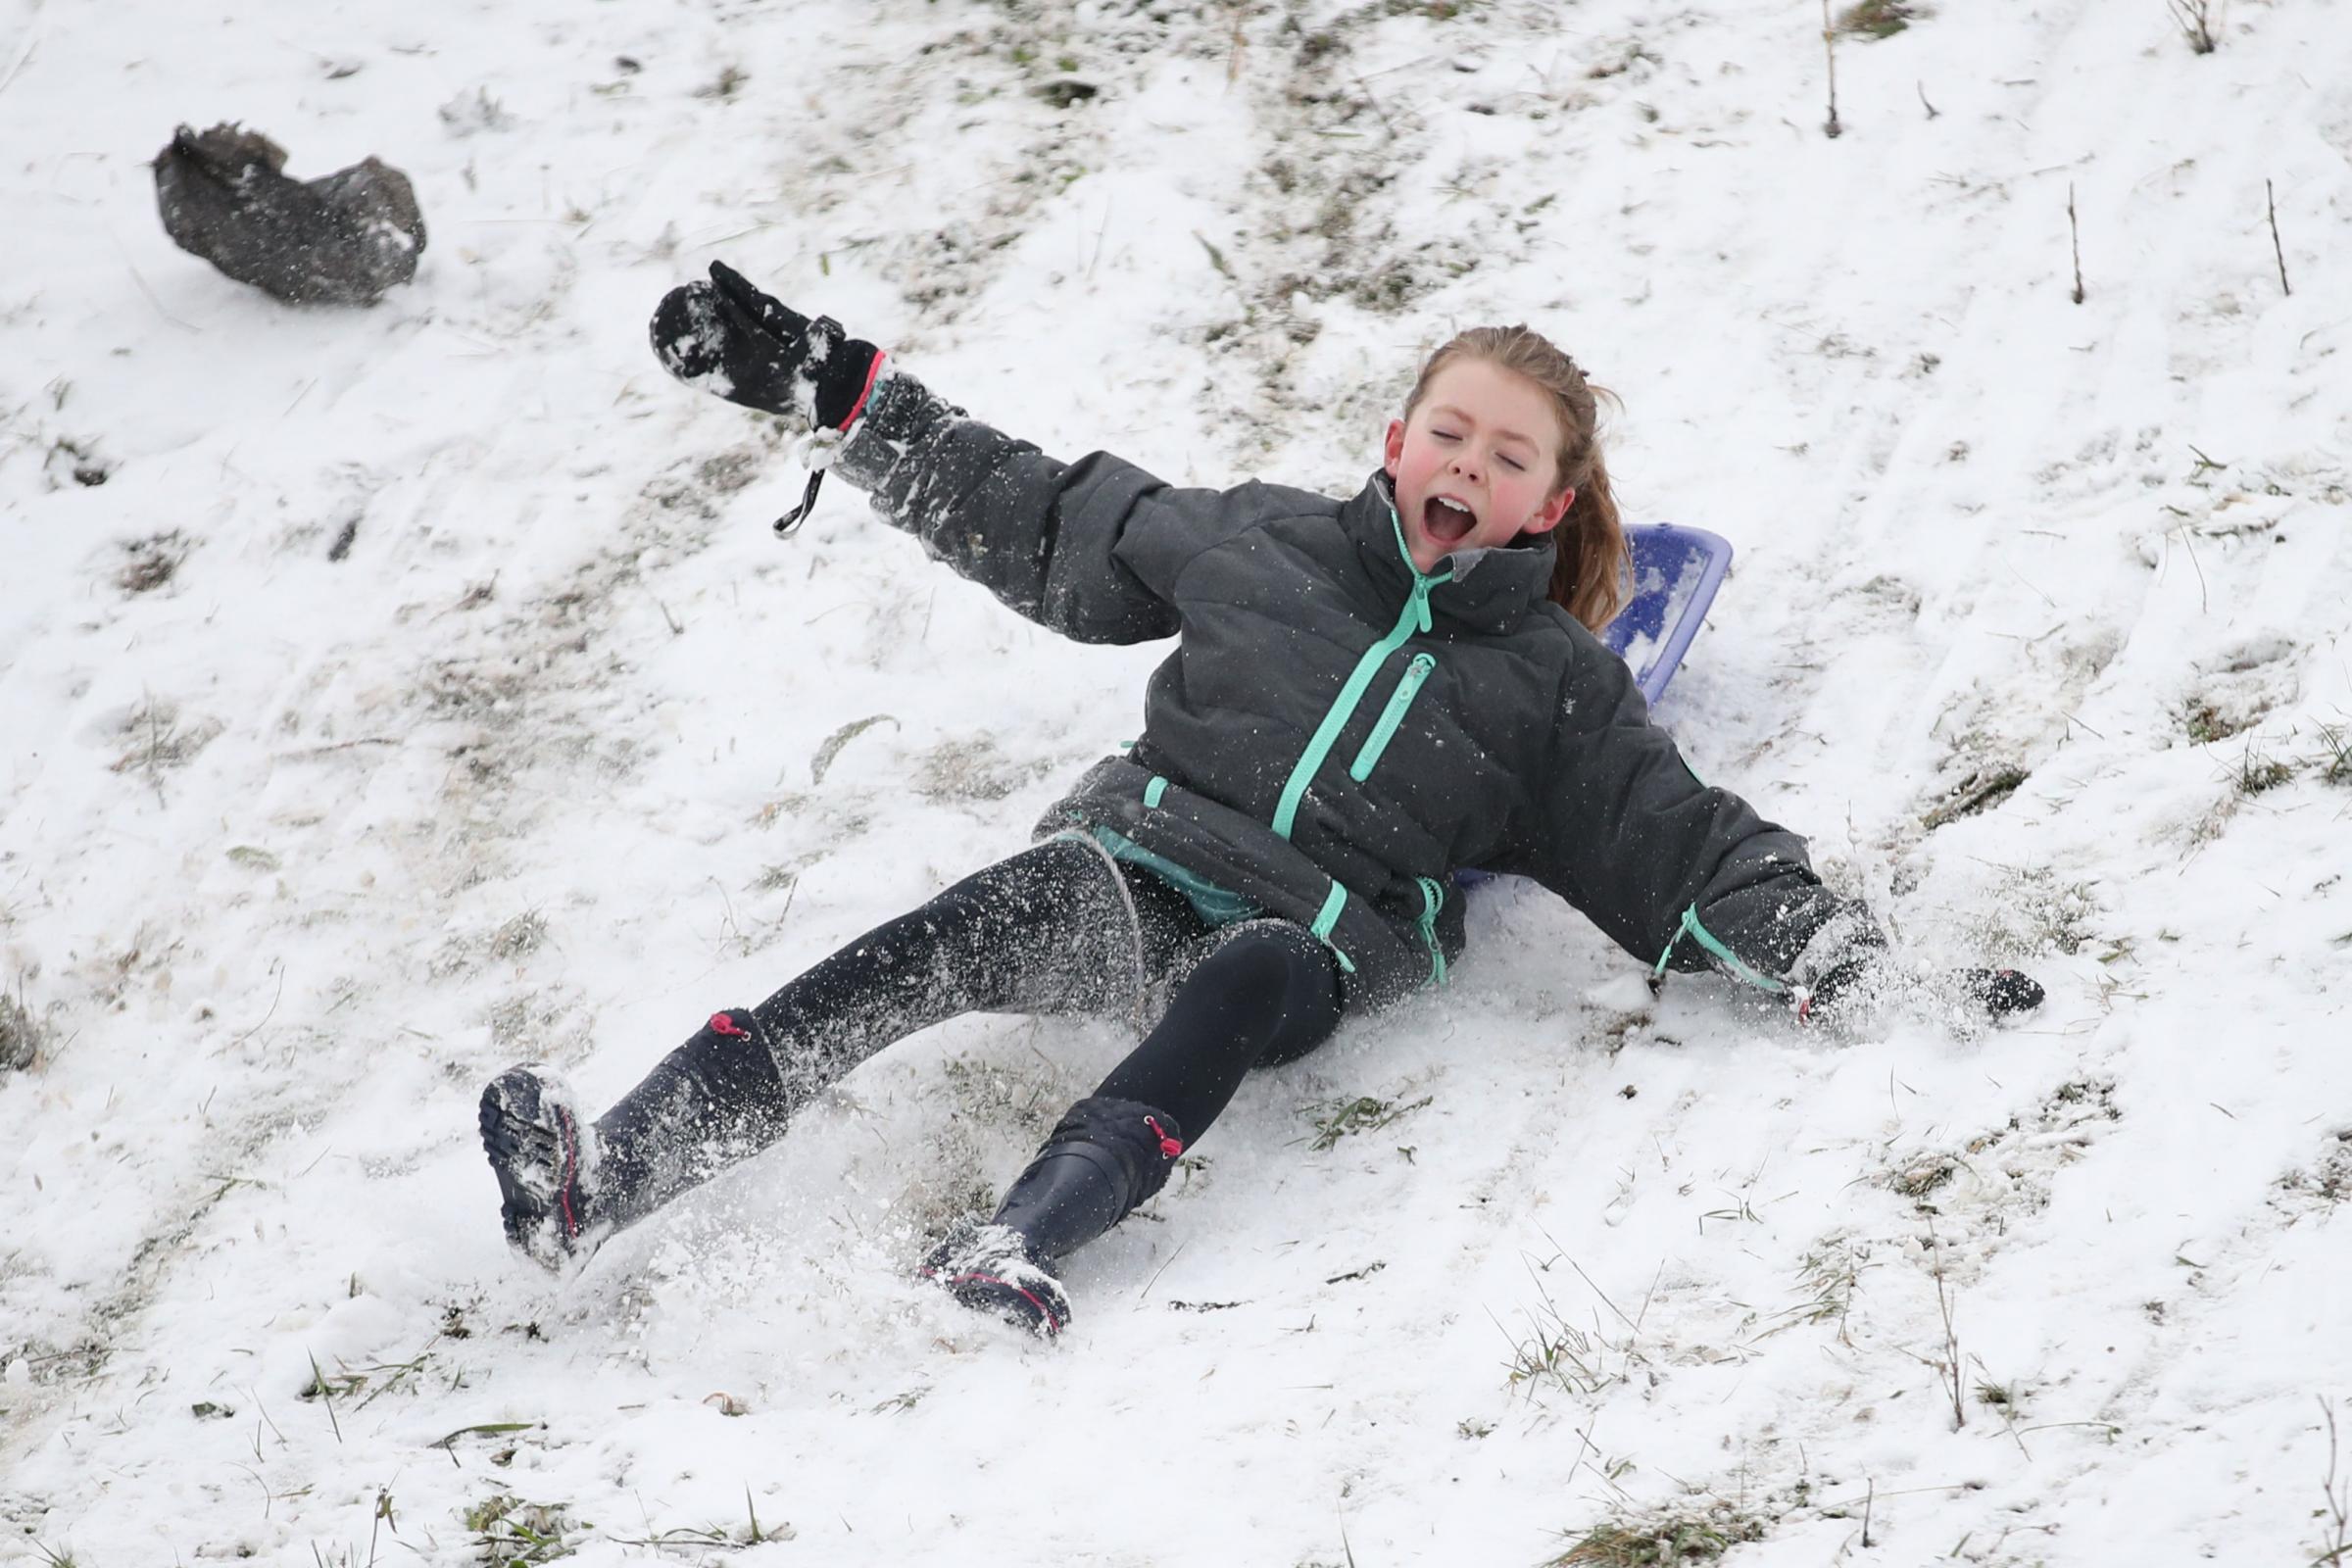 Amy Heather, aged 10, sledging near the seafront at Southend. Picture: Yui Mok/PA Wire